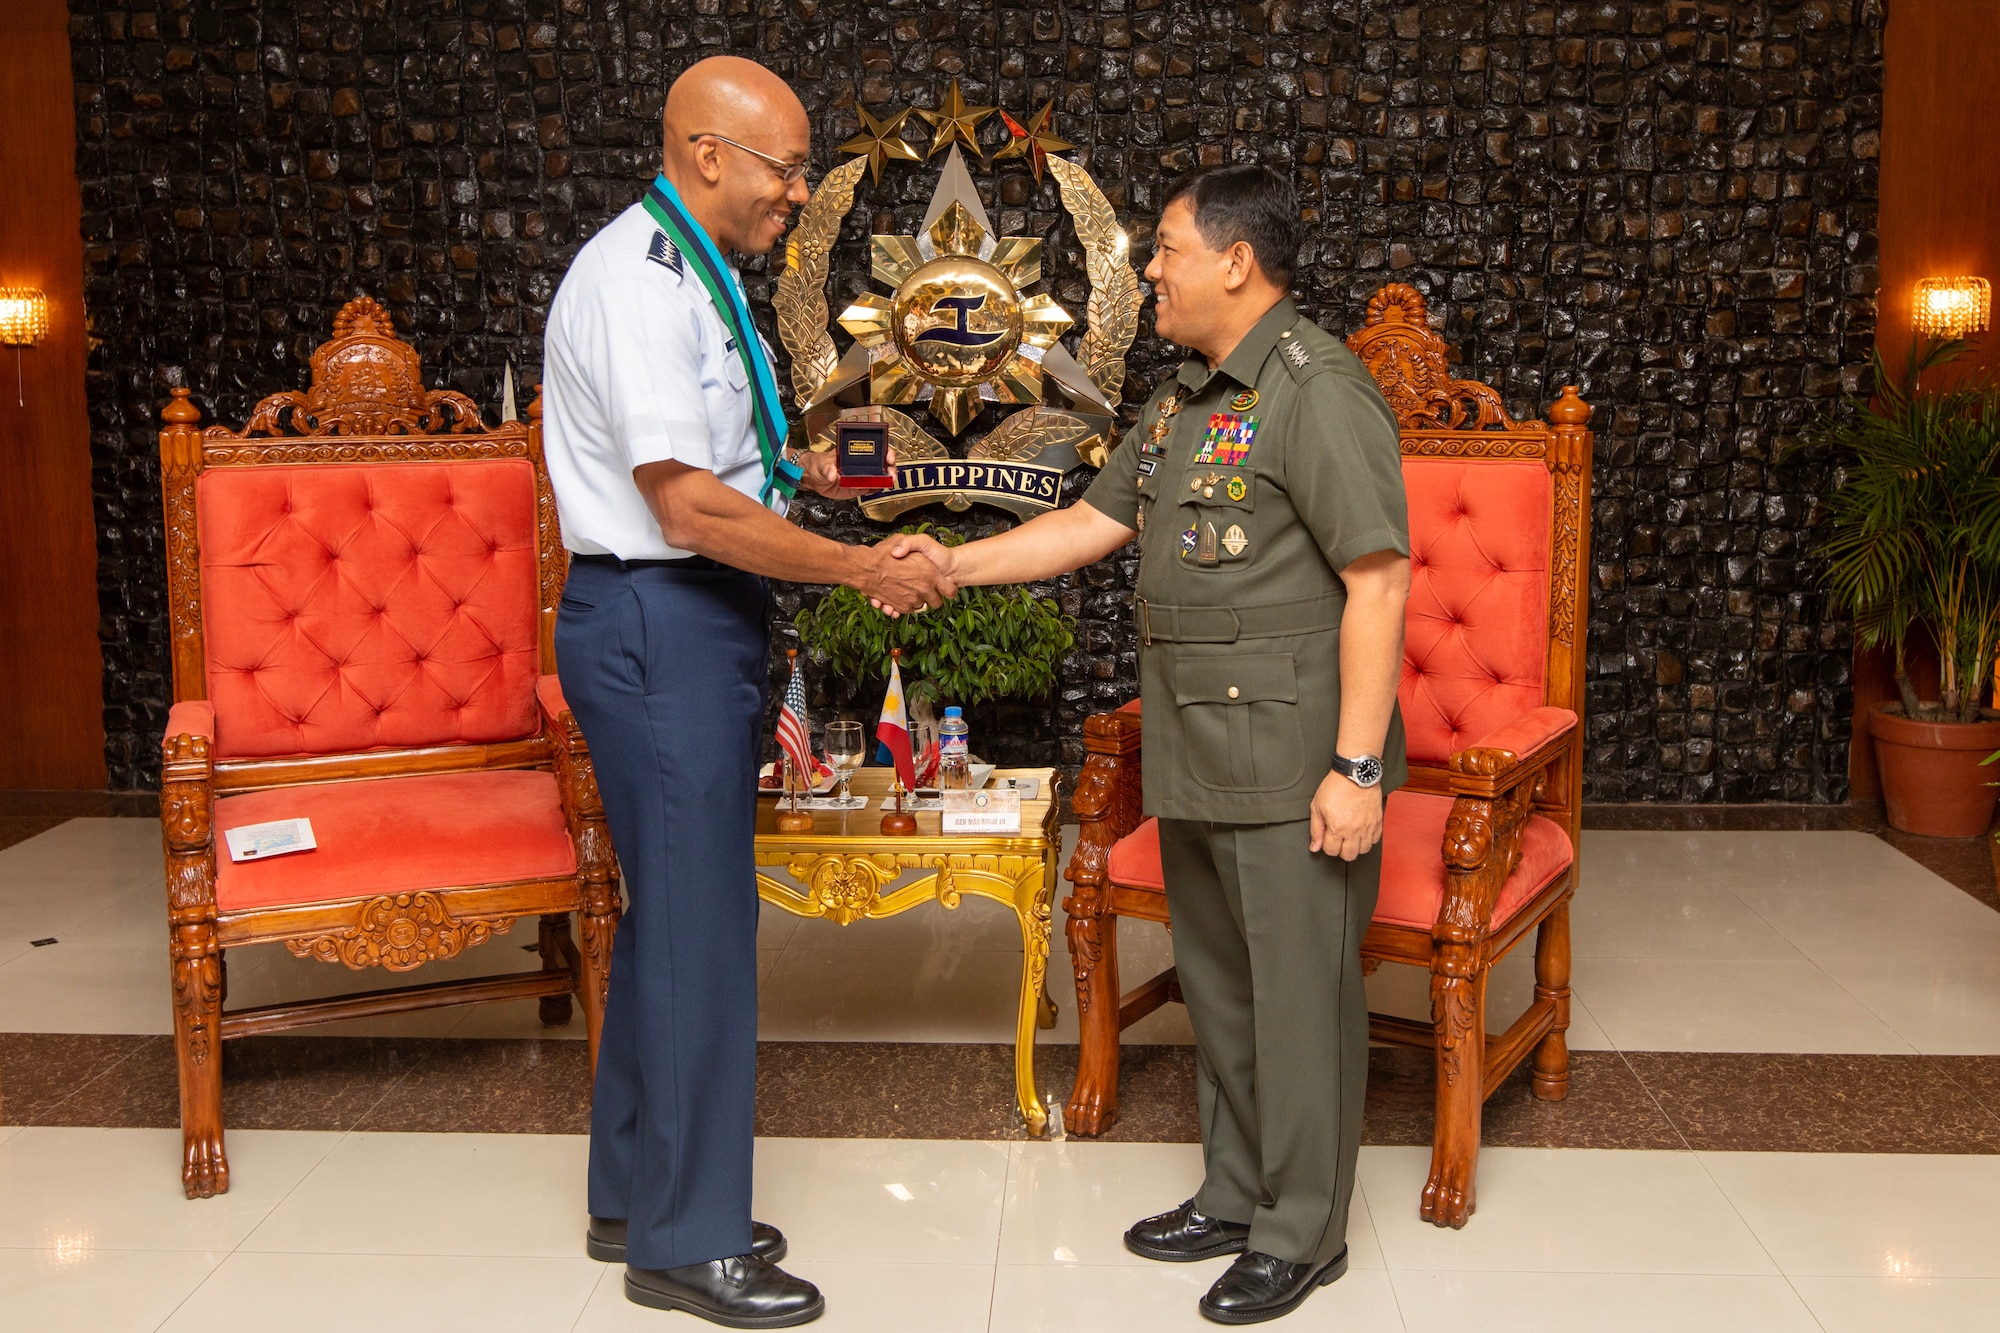 Gen. CQ Brown, Jr., Pacific Air Forces commander, meets with Gen. Benjamin Madrigal, Jr., chief of staff of the Armed Forces of the Philippines  May 16, 2019, at Camp General Emilio Aguinaldo. As part of a three-day visit to the country, Brown met with senior officials from the Armed Forces of the Philippines (AFP) and the Philippine Air Force (PAF) to demonstrate the United States’ shared commitment to peace and security in the region, as well as seek opportunities to enhance interoperability and capability with the PAF.